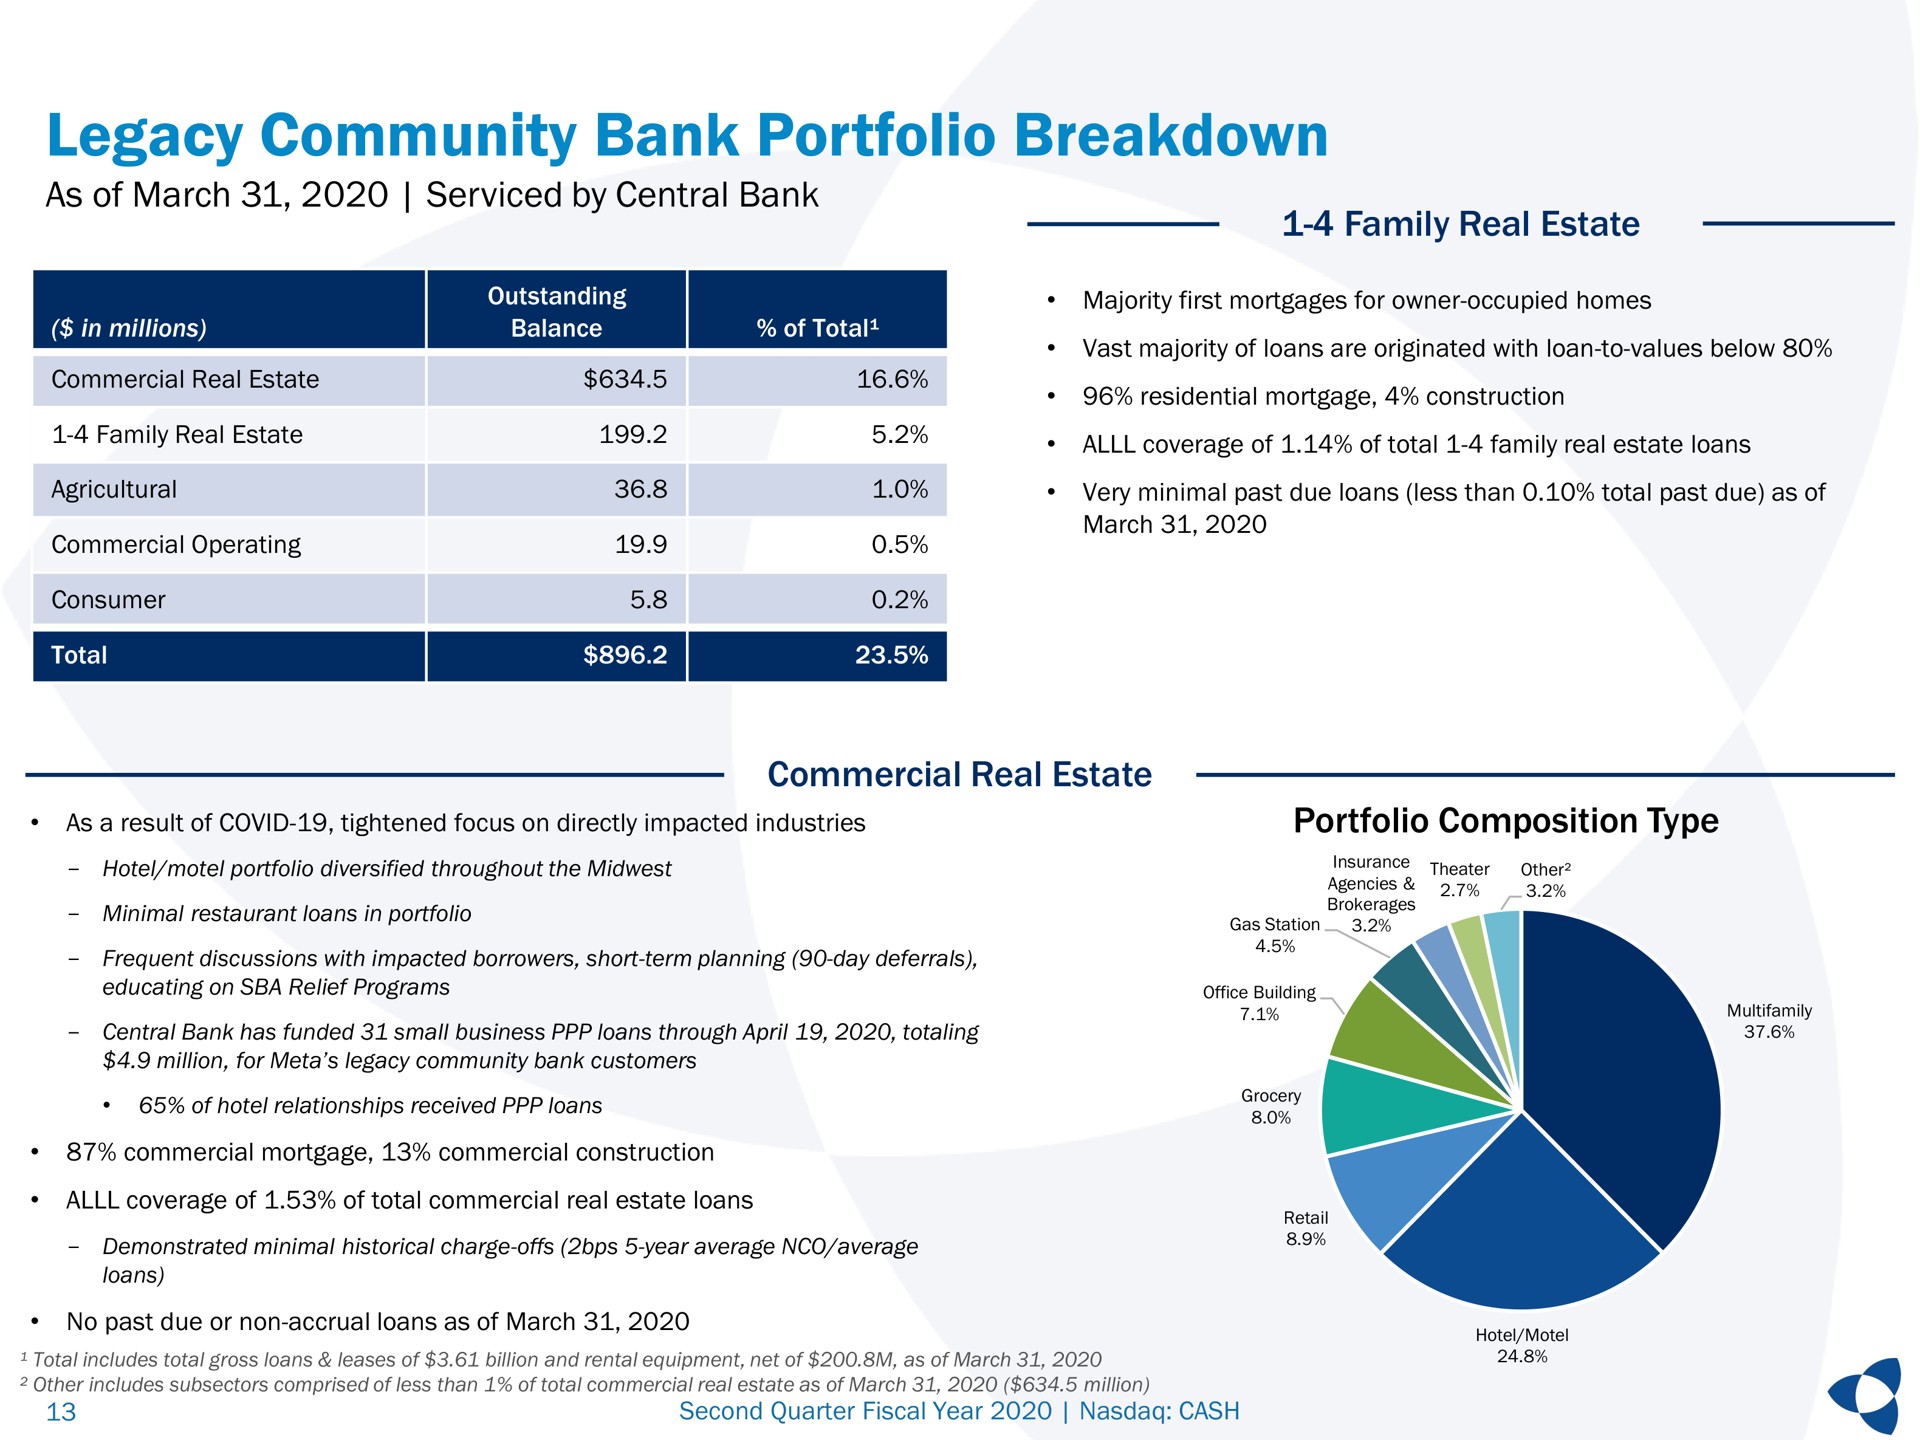 legacy community bank portfolio breakdown as of march serviced by central bank family real estate portfolio composition type commercial real estate result covid tightened focus on directly impacted industries | Pathward Financial